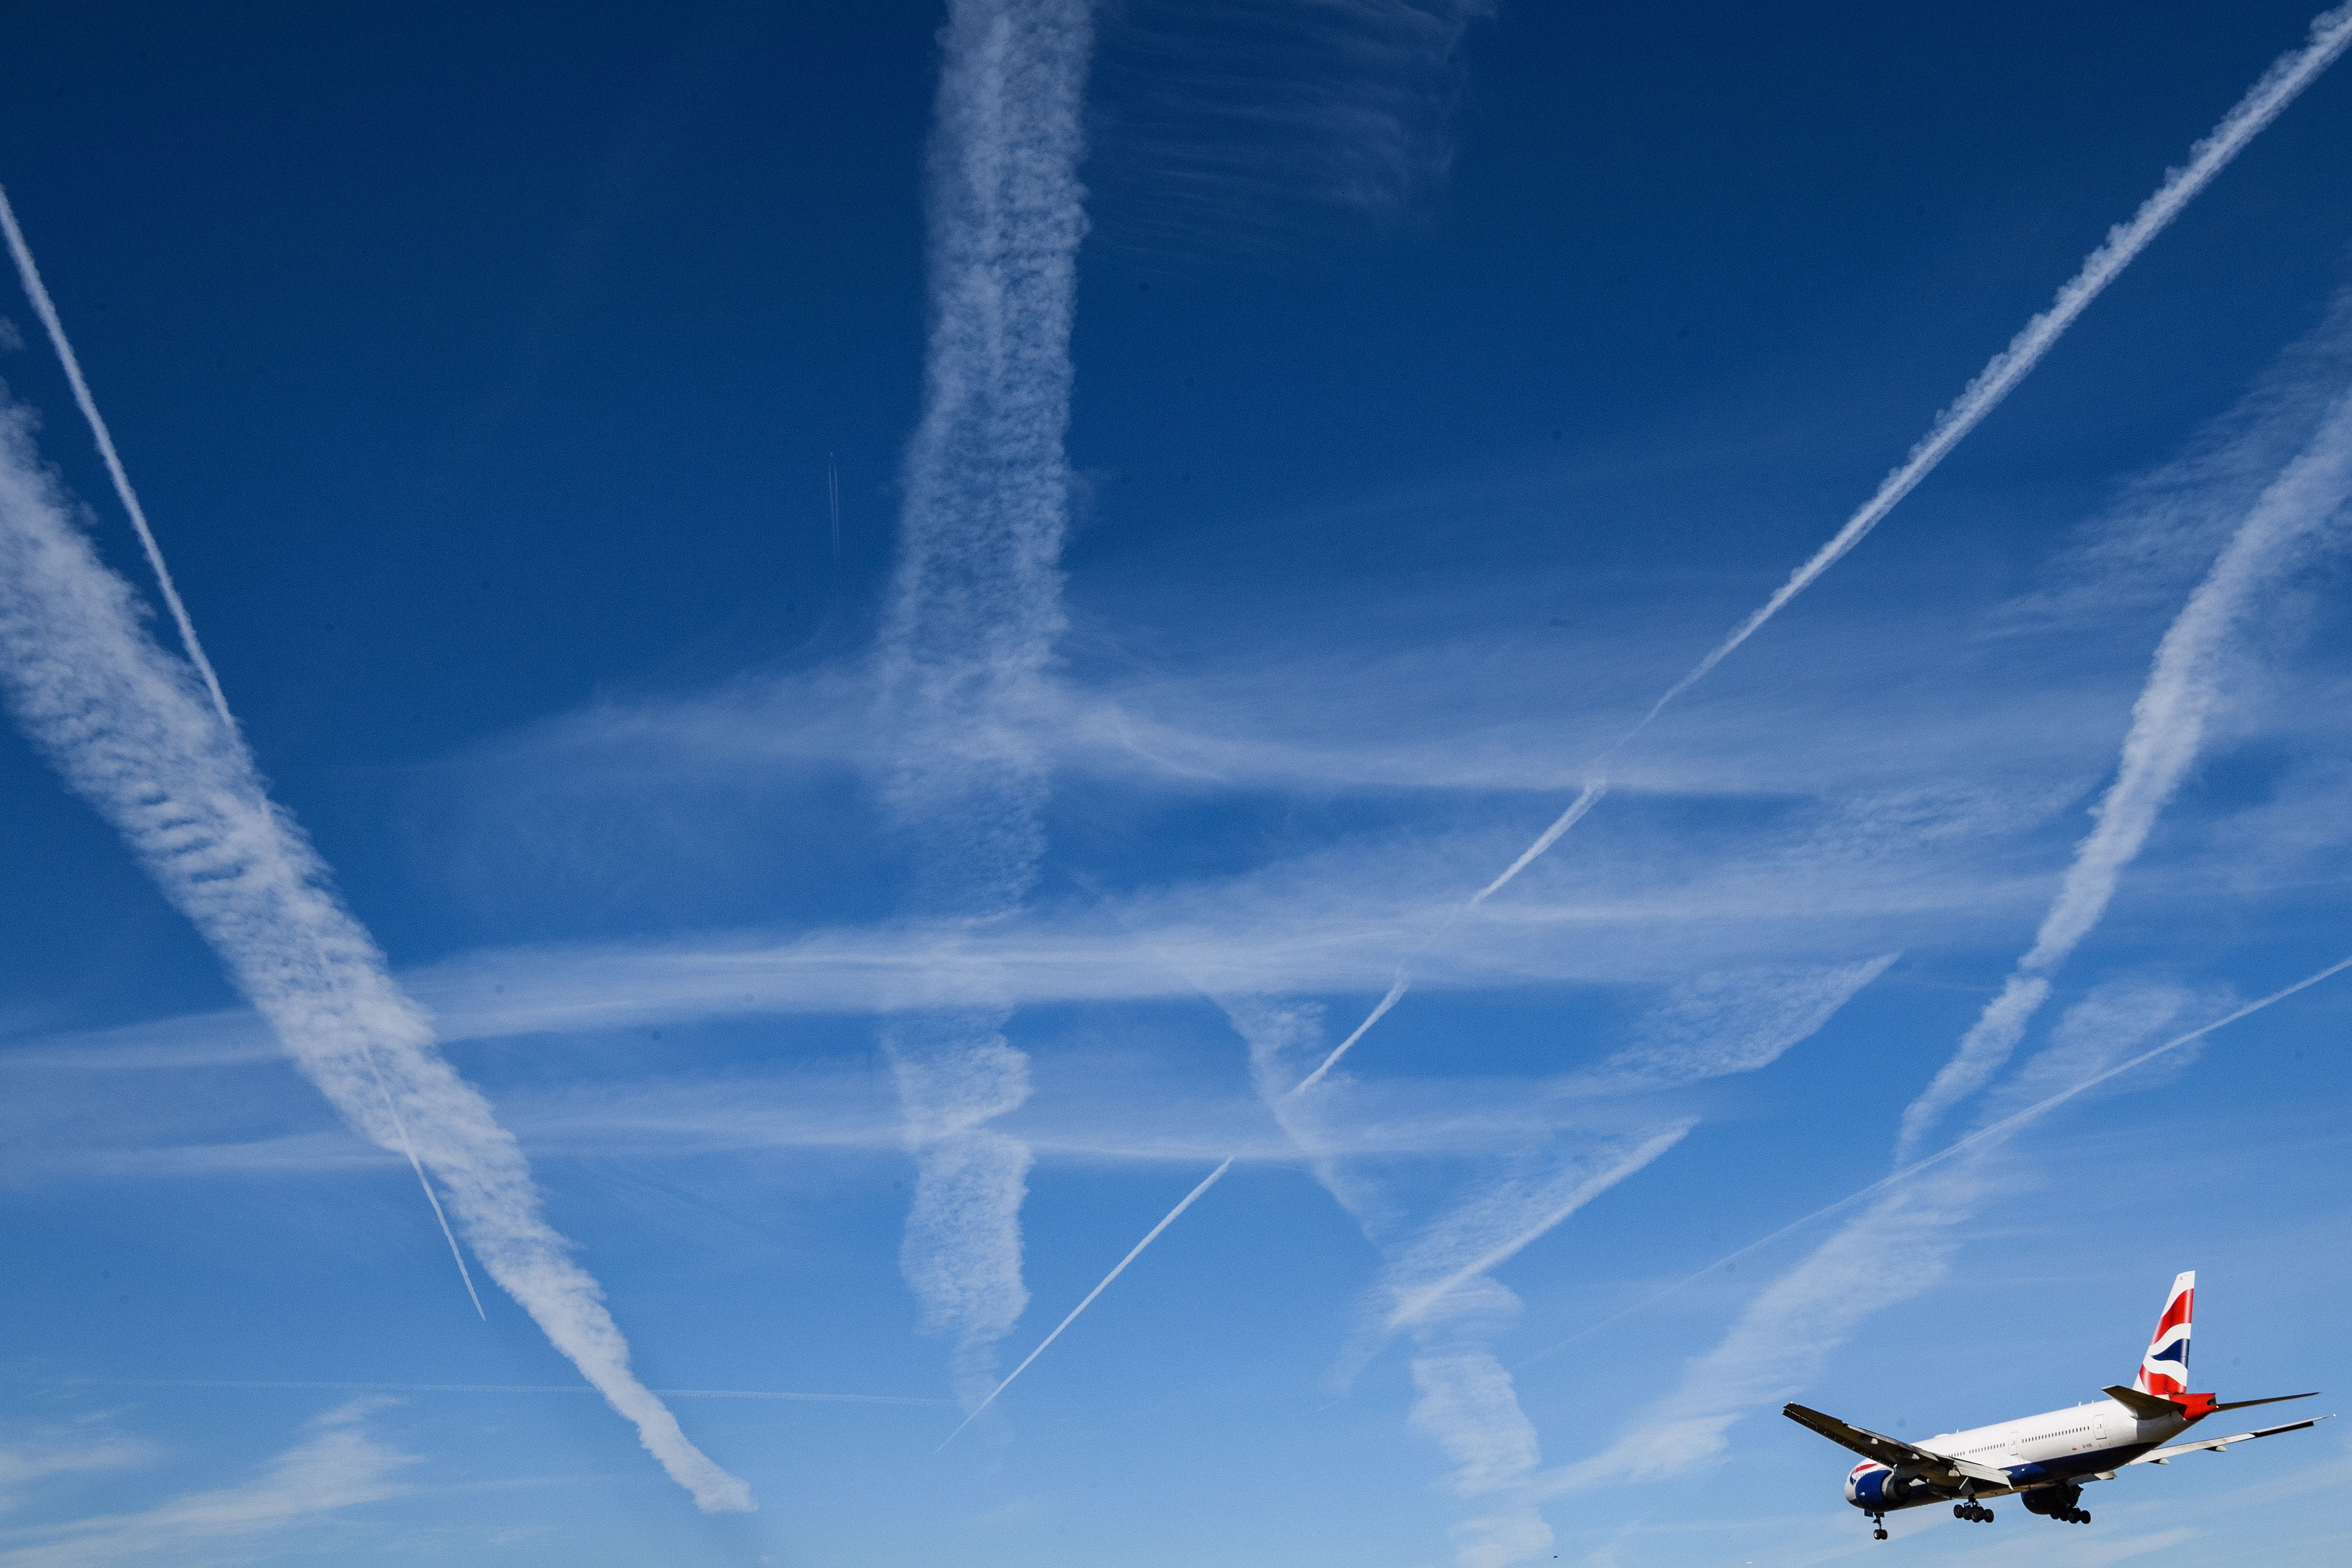 Contrails in the sky with BA aircraft